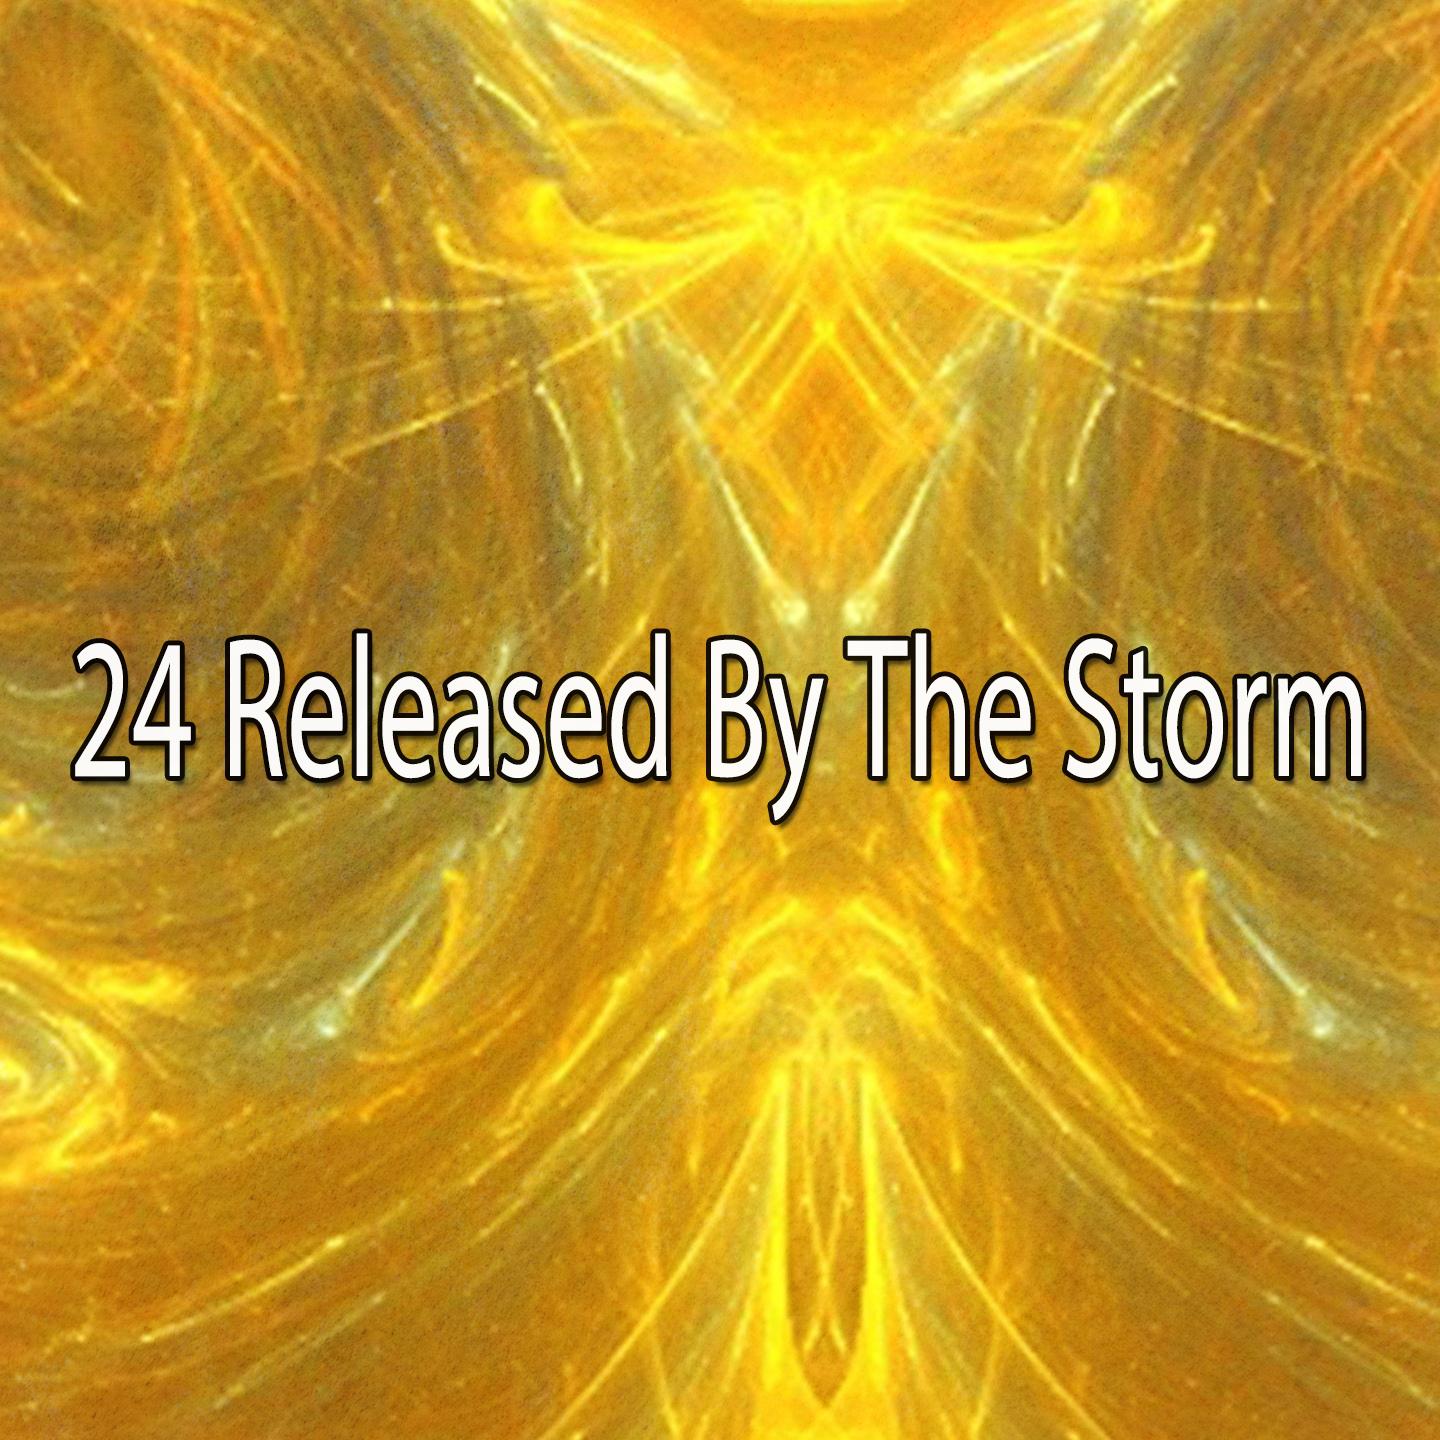 24 Released by the Storm